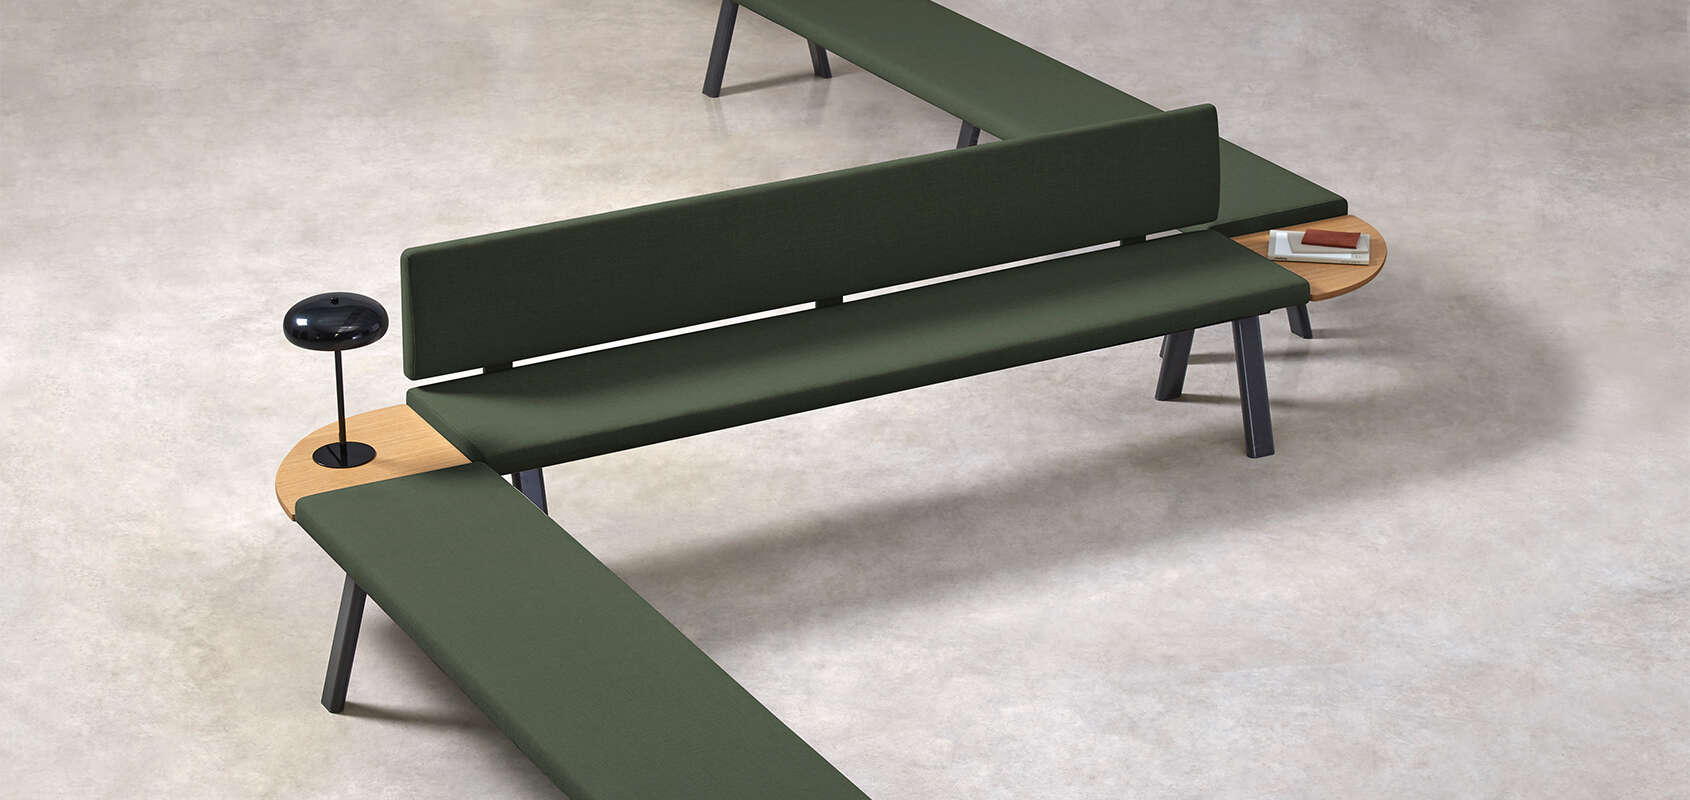 Plania Bench Seating System